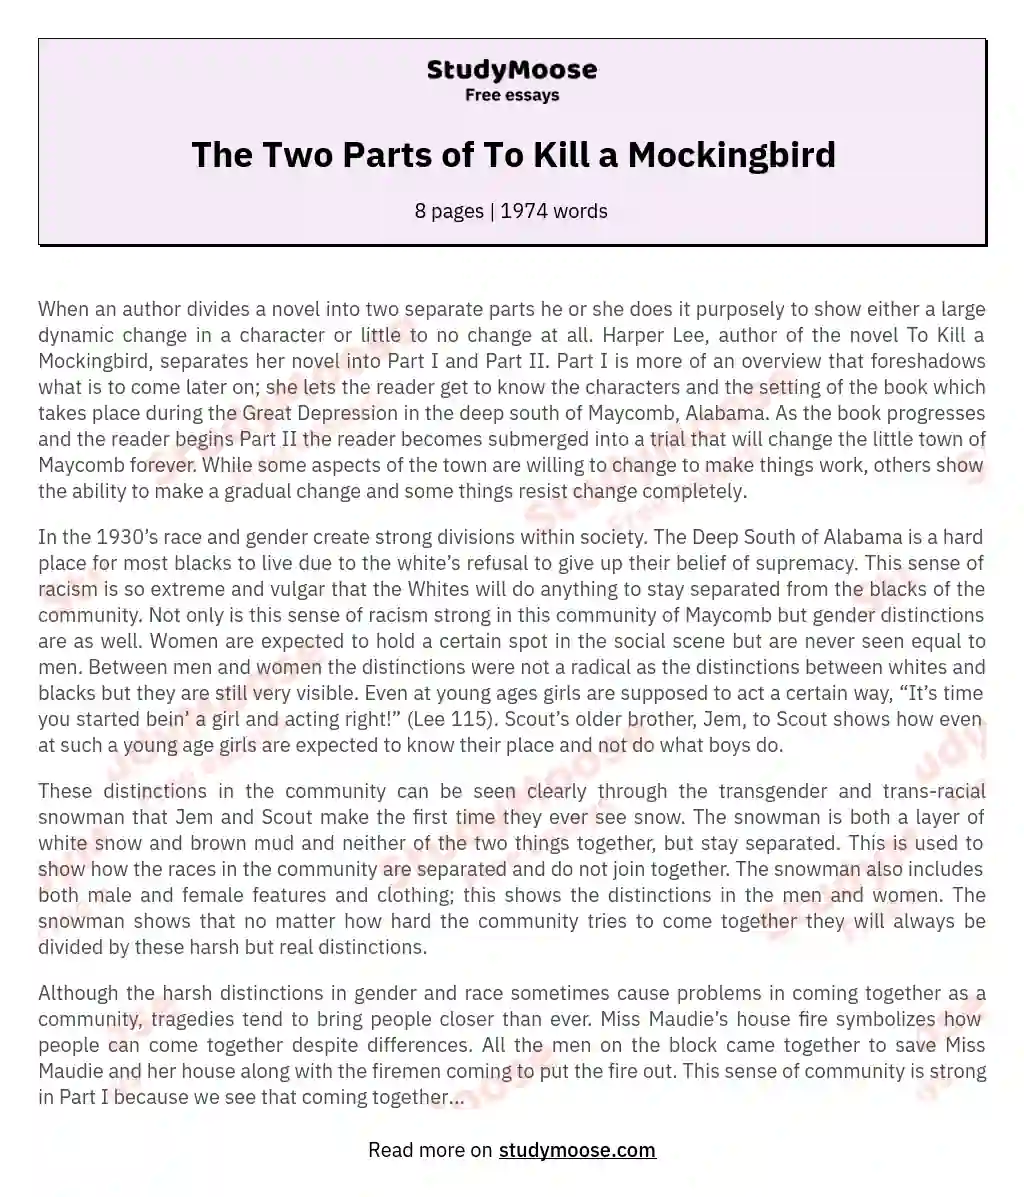 The Two Parts of To Kill a Mockingbird